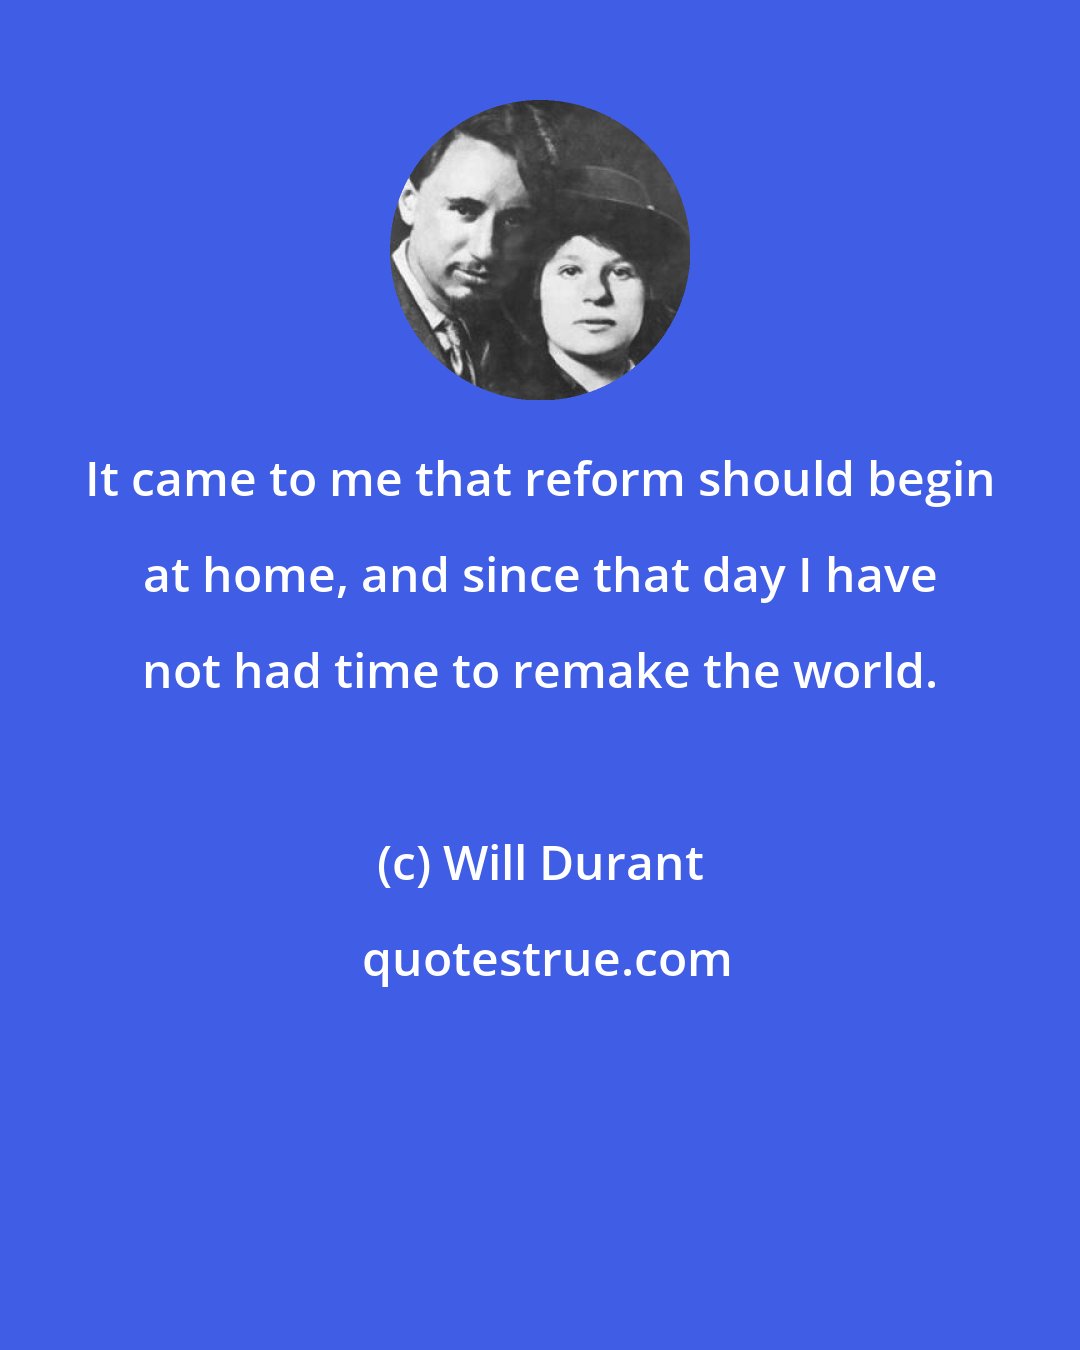 Will Durant: It came to me that reform should begin at home, and since that day I have not had time to remake the world.